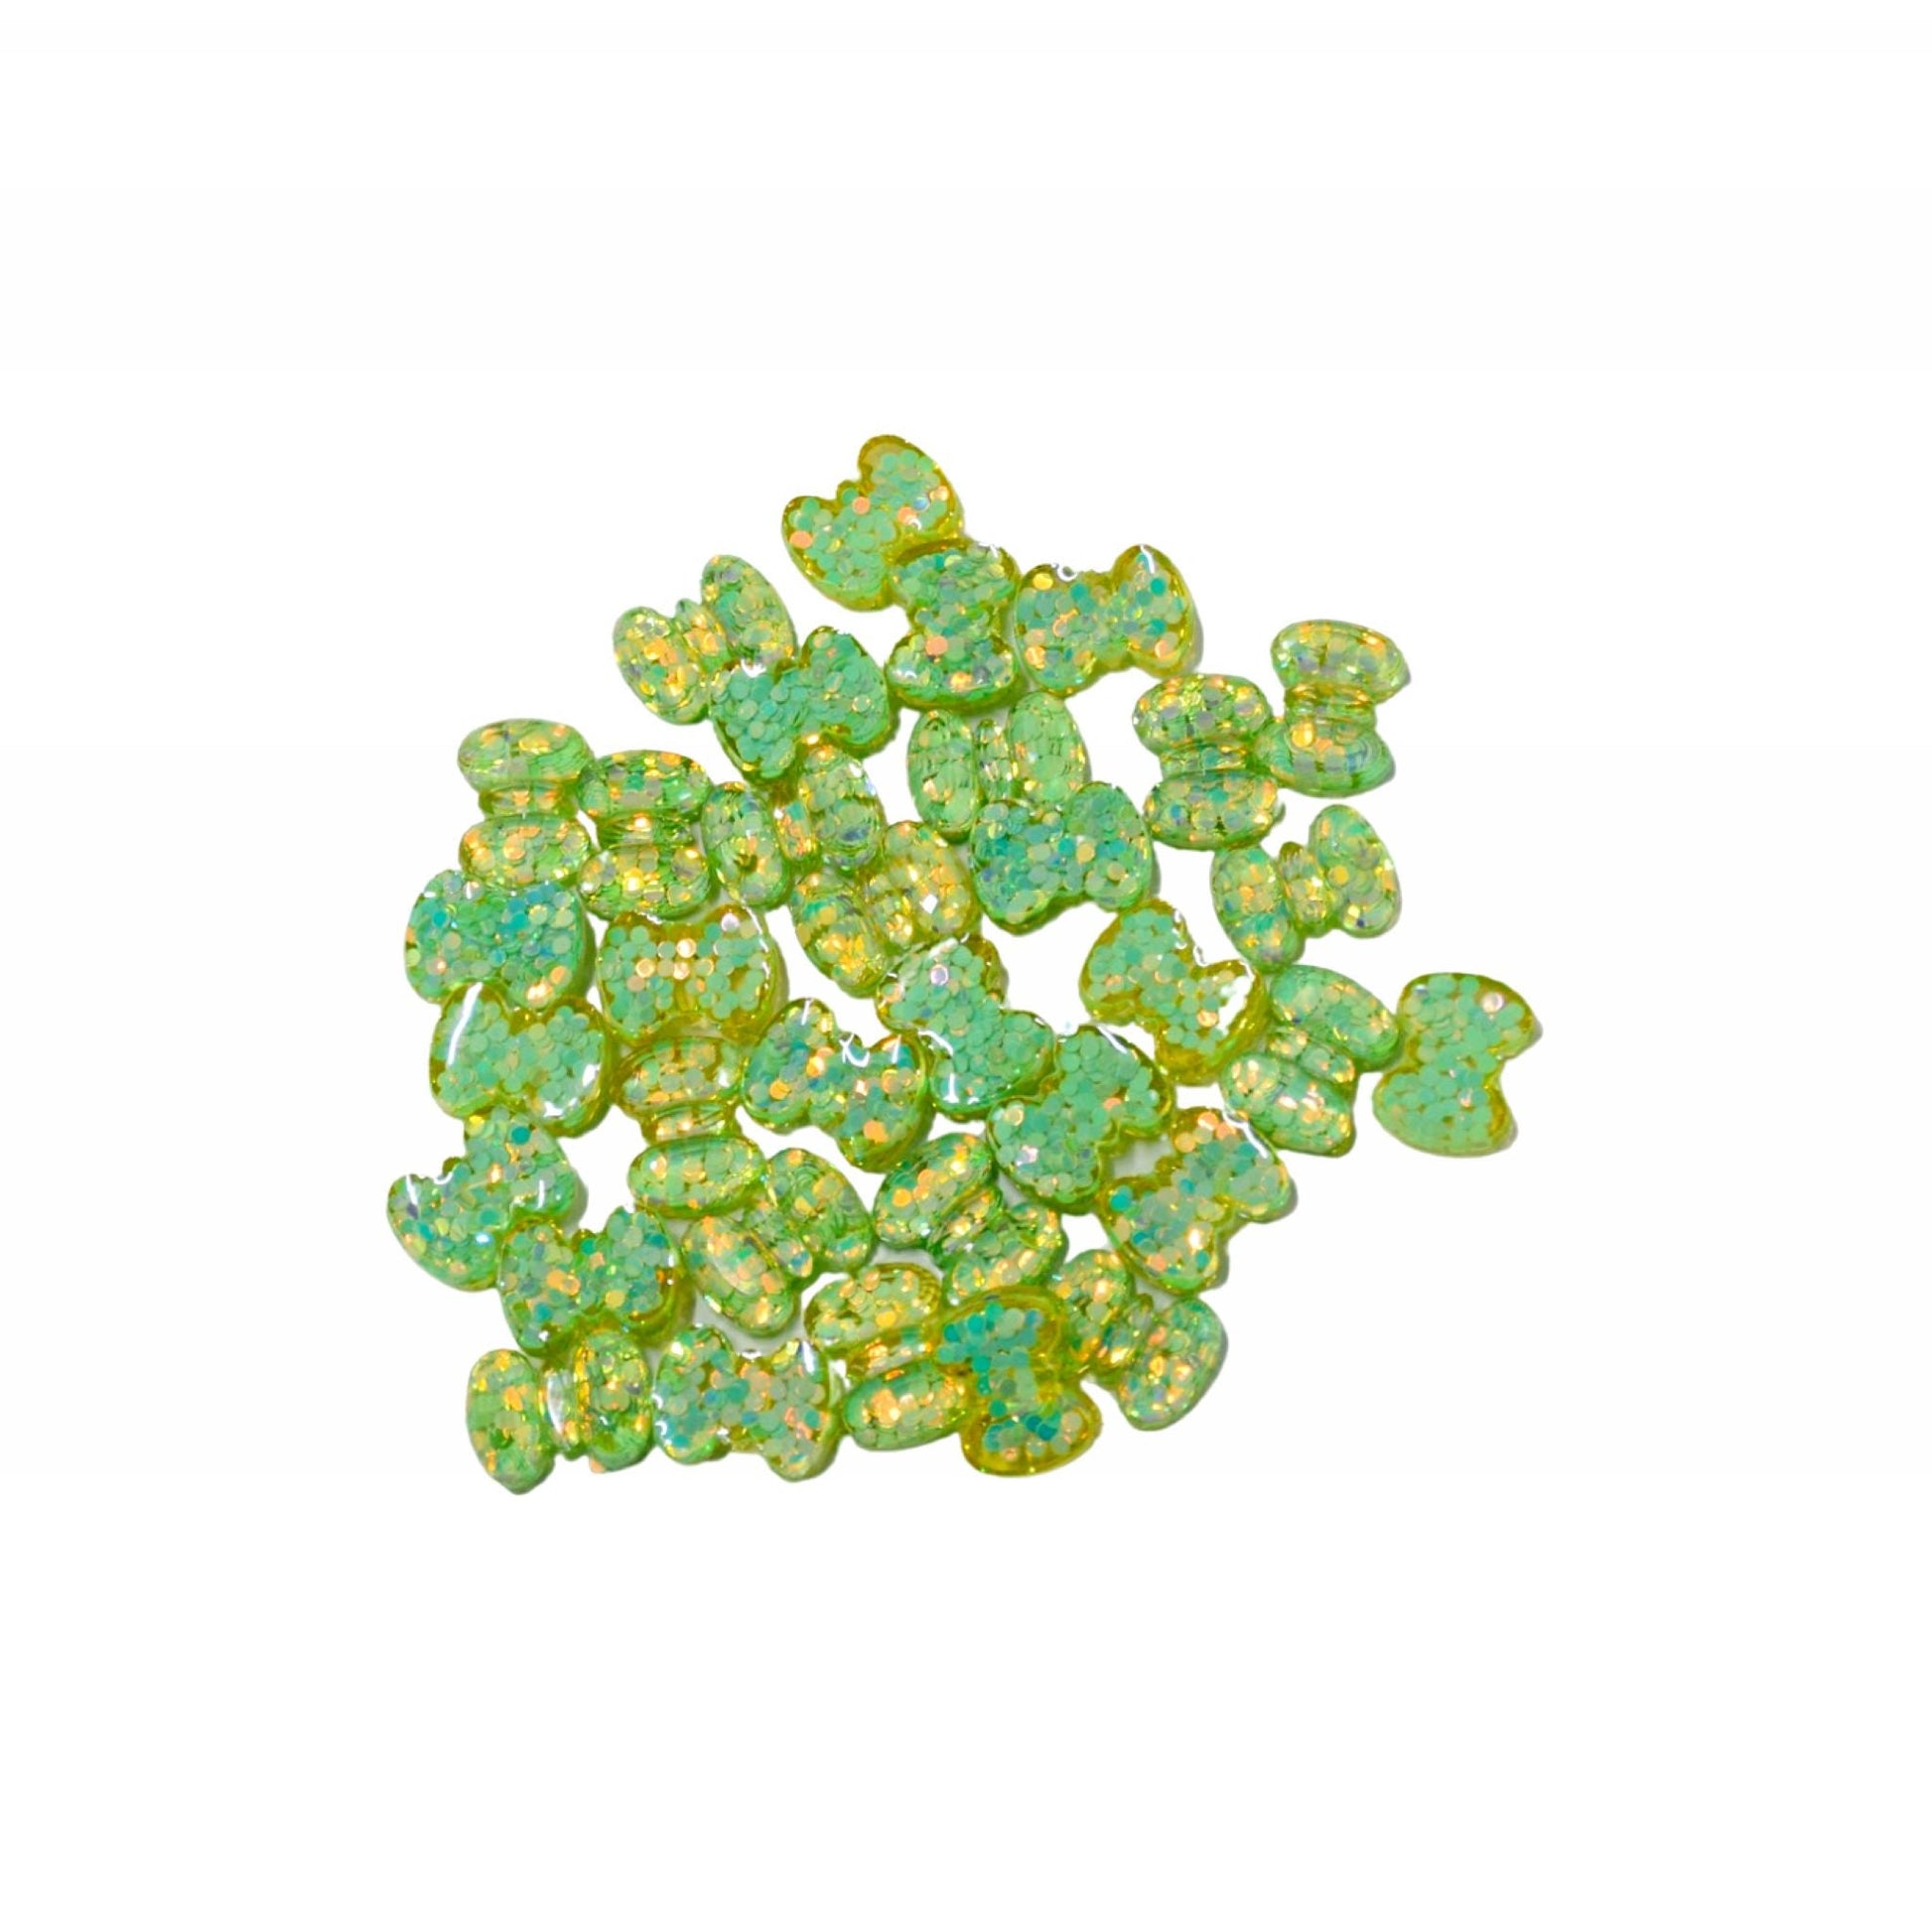 Indian Petals Small Resin Glittery Bow Flat-back Cabochons Motif for Craft Decoration or Rakhi - 12449, Glittery  Sea Green